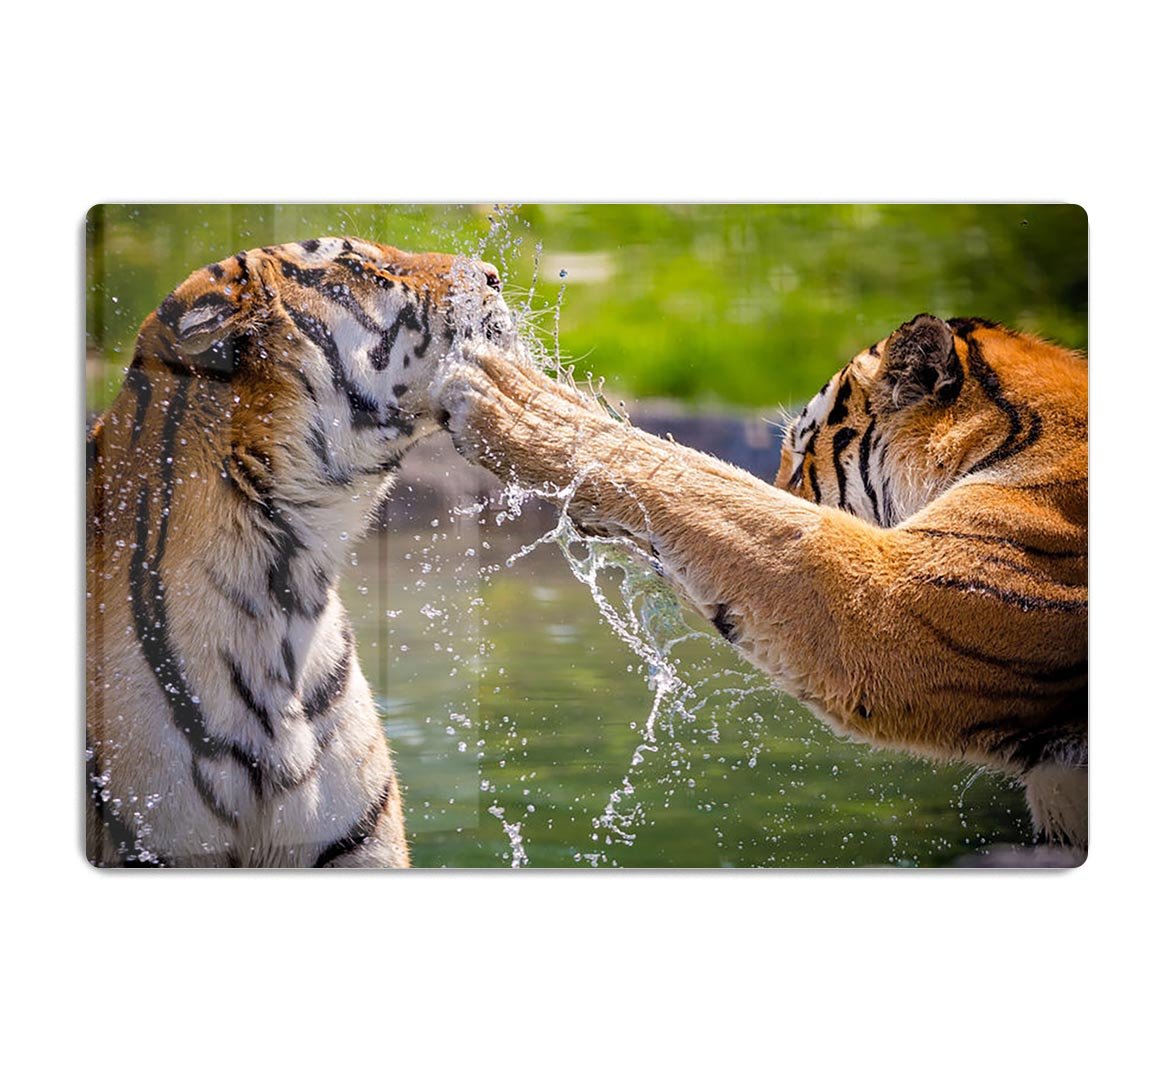 Two adult tigers at play in the water HD Metal Print - Canvas Art Rocks - 1